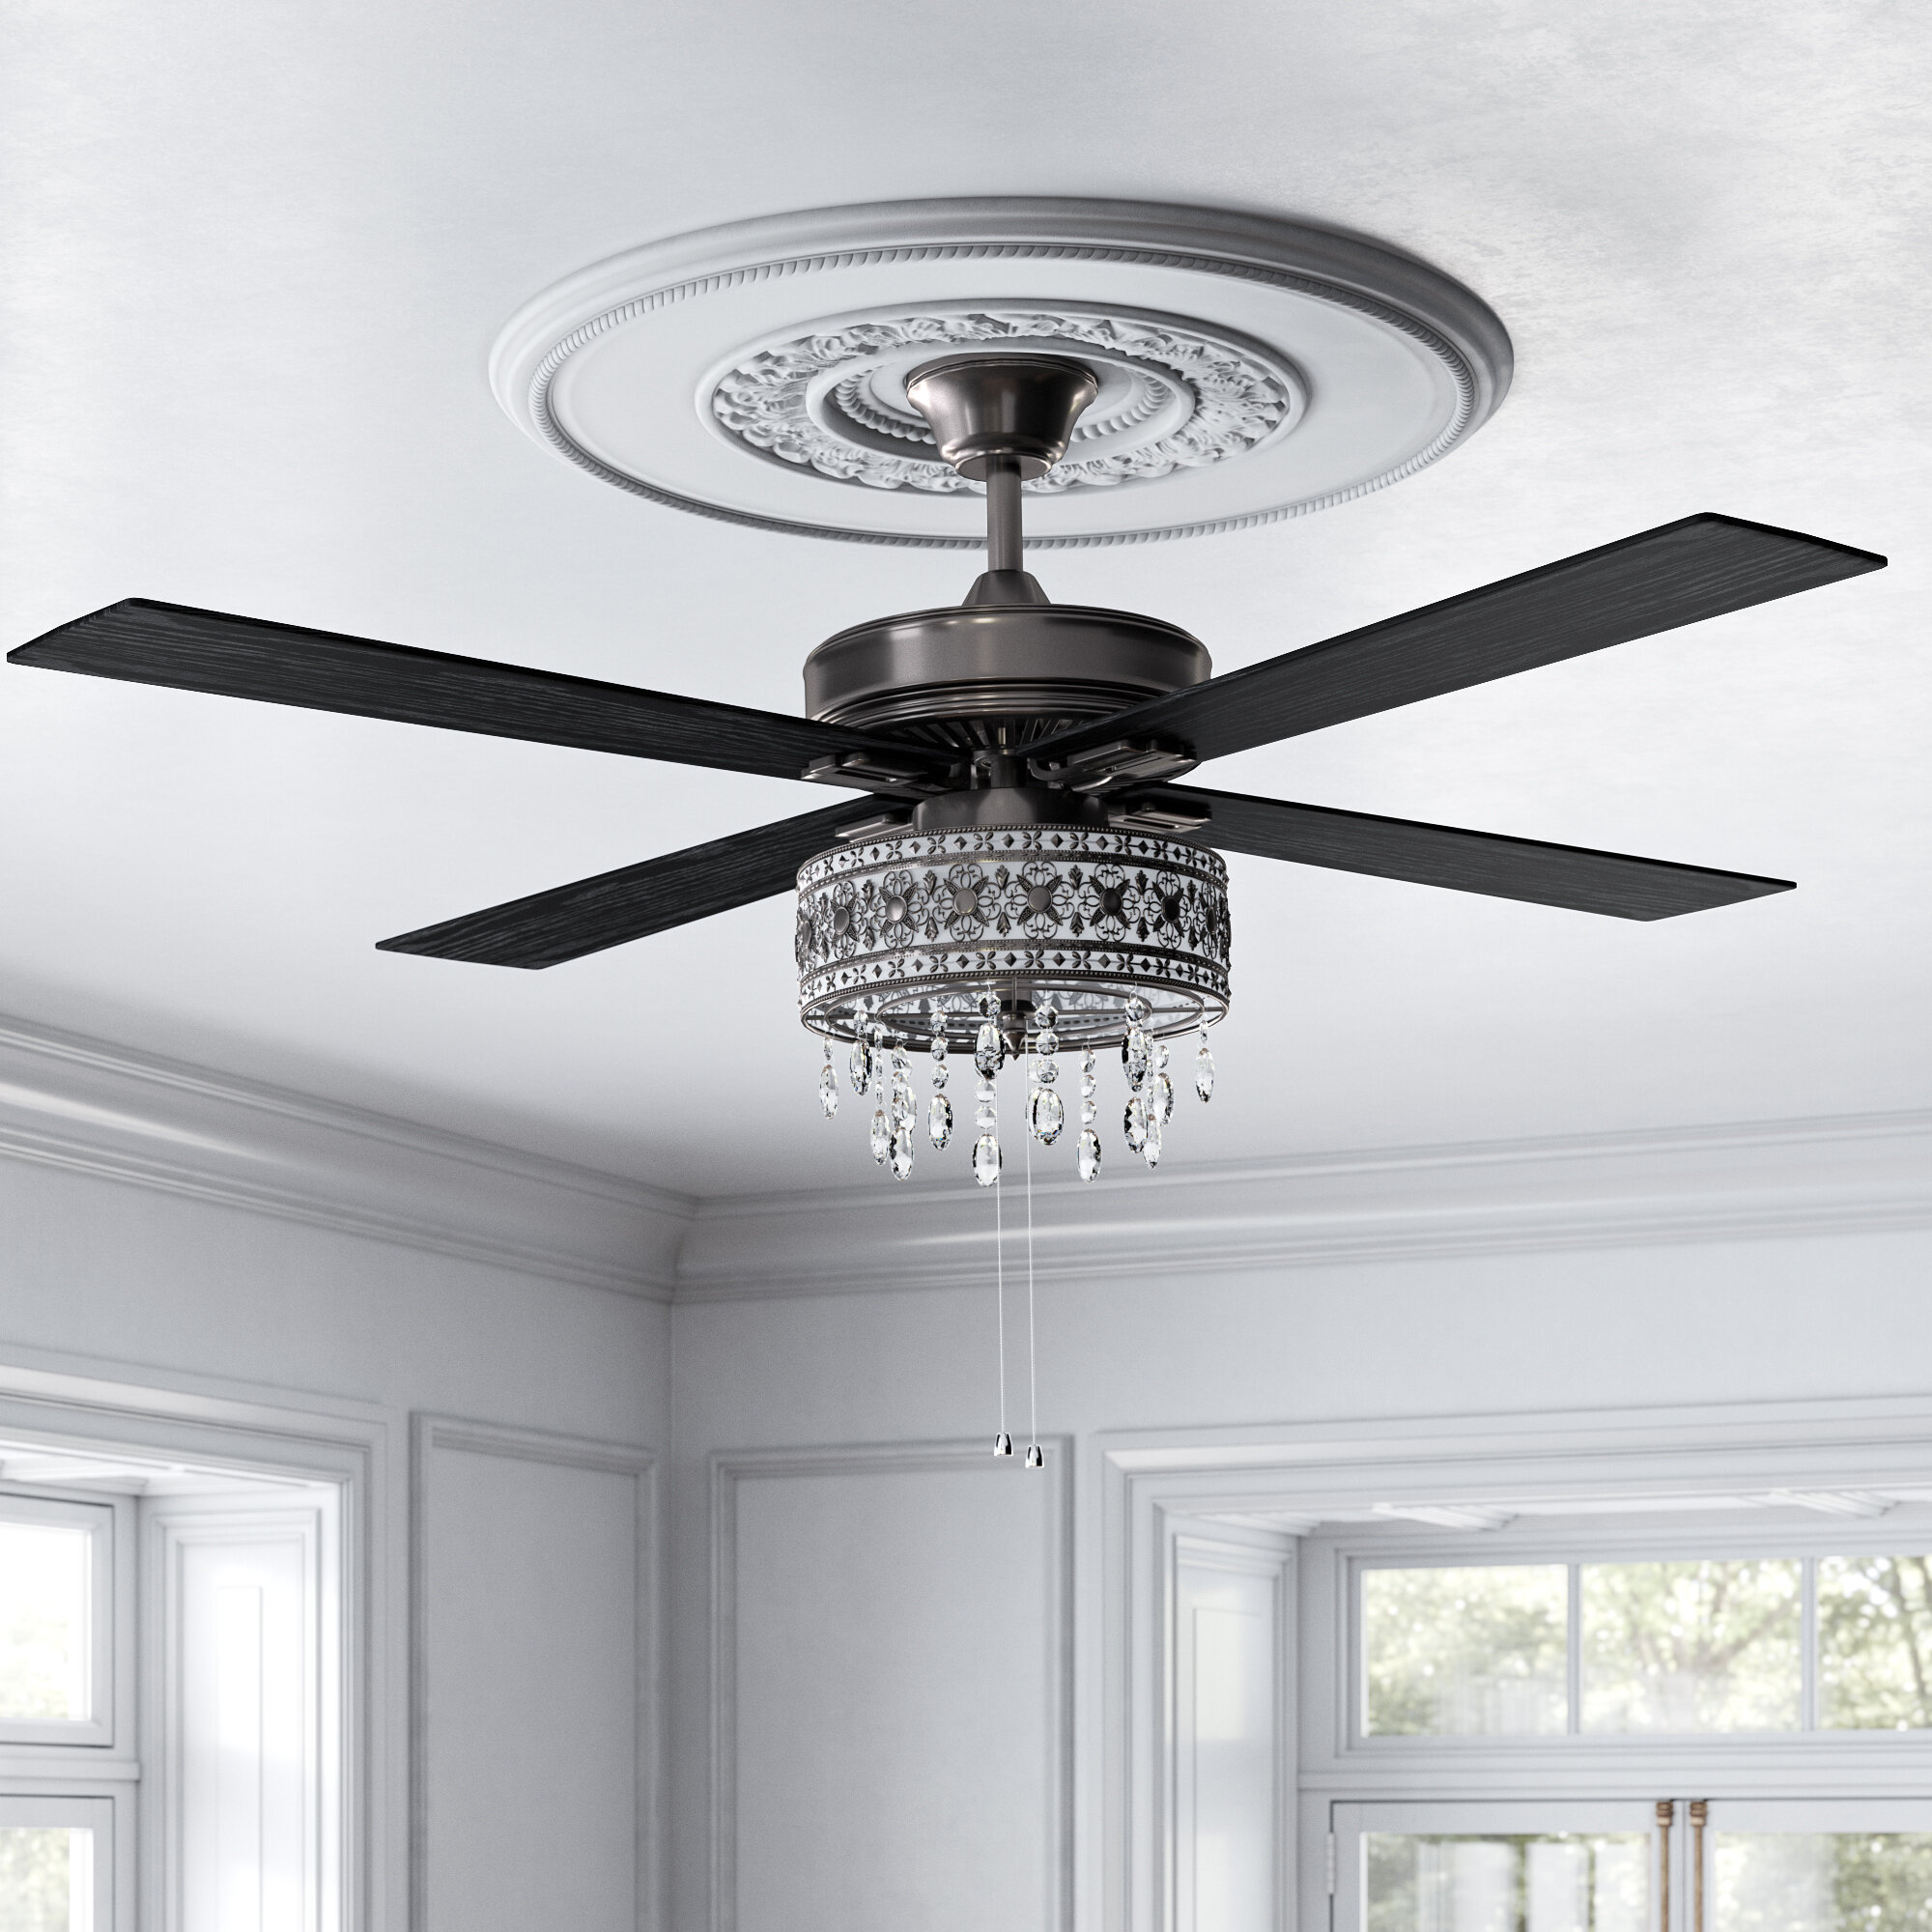 Kelly Clarkson Home 52 Leonie 5 Blade Crystal Ceiling Fan With Pull Chain And Light Kit Included Reviews Wayfair